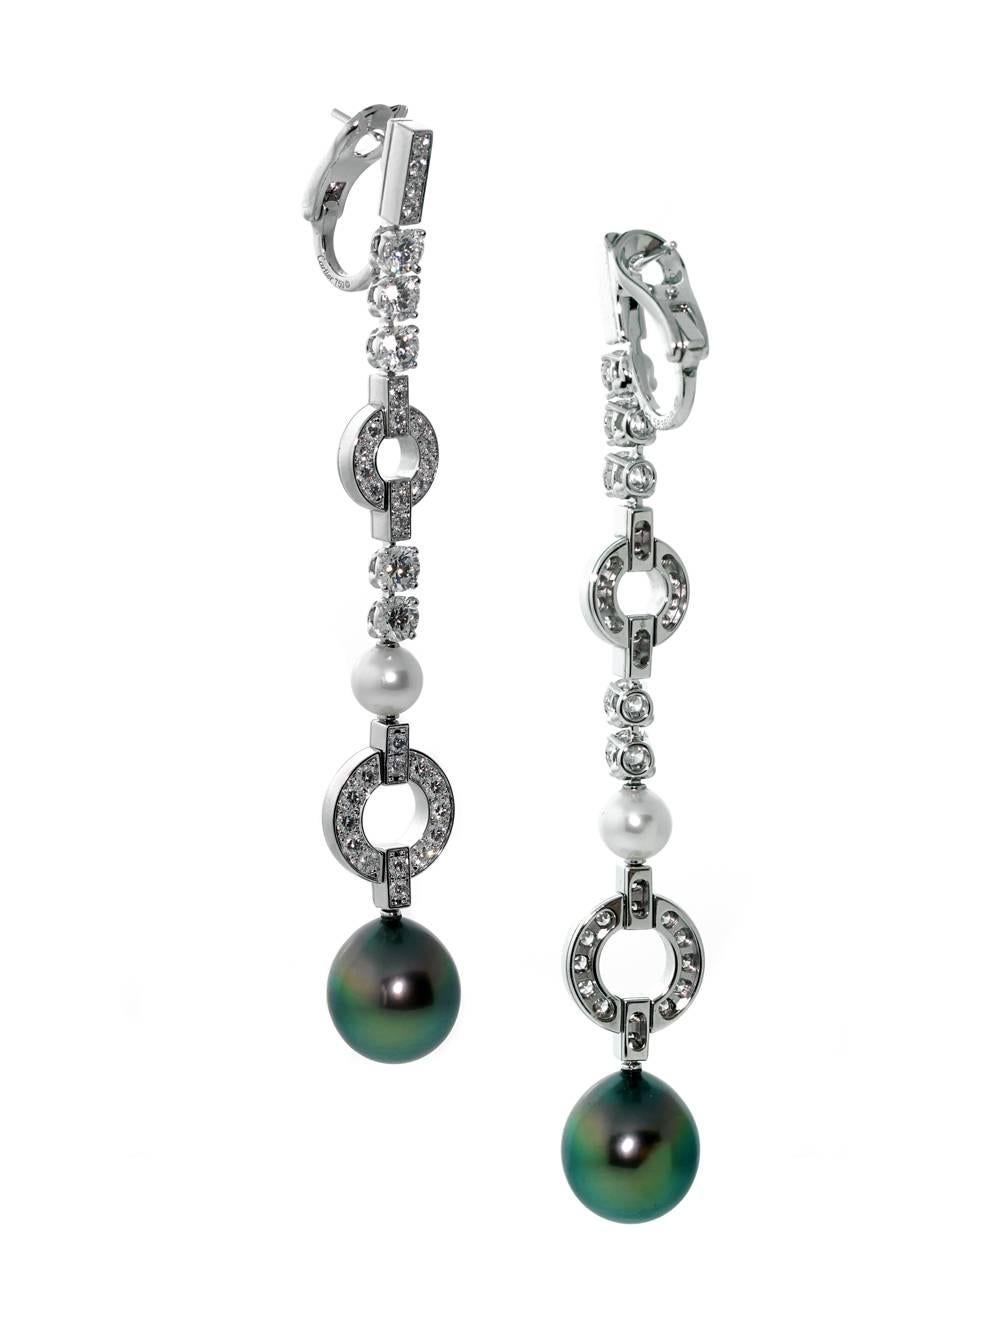 Made with pearls and diamonds, these earrings will bring your regal side to light. Since the earring set is designed to dangle from the lobes, they’ll sway and shimmer with every shift of your head. This unique setting radiates class with its